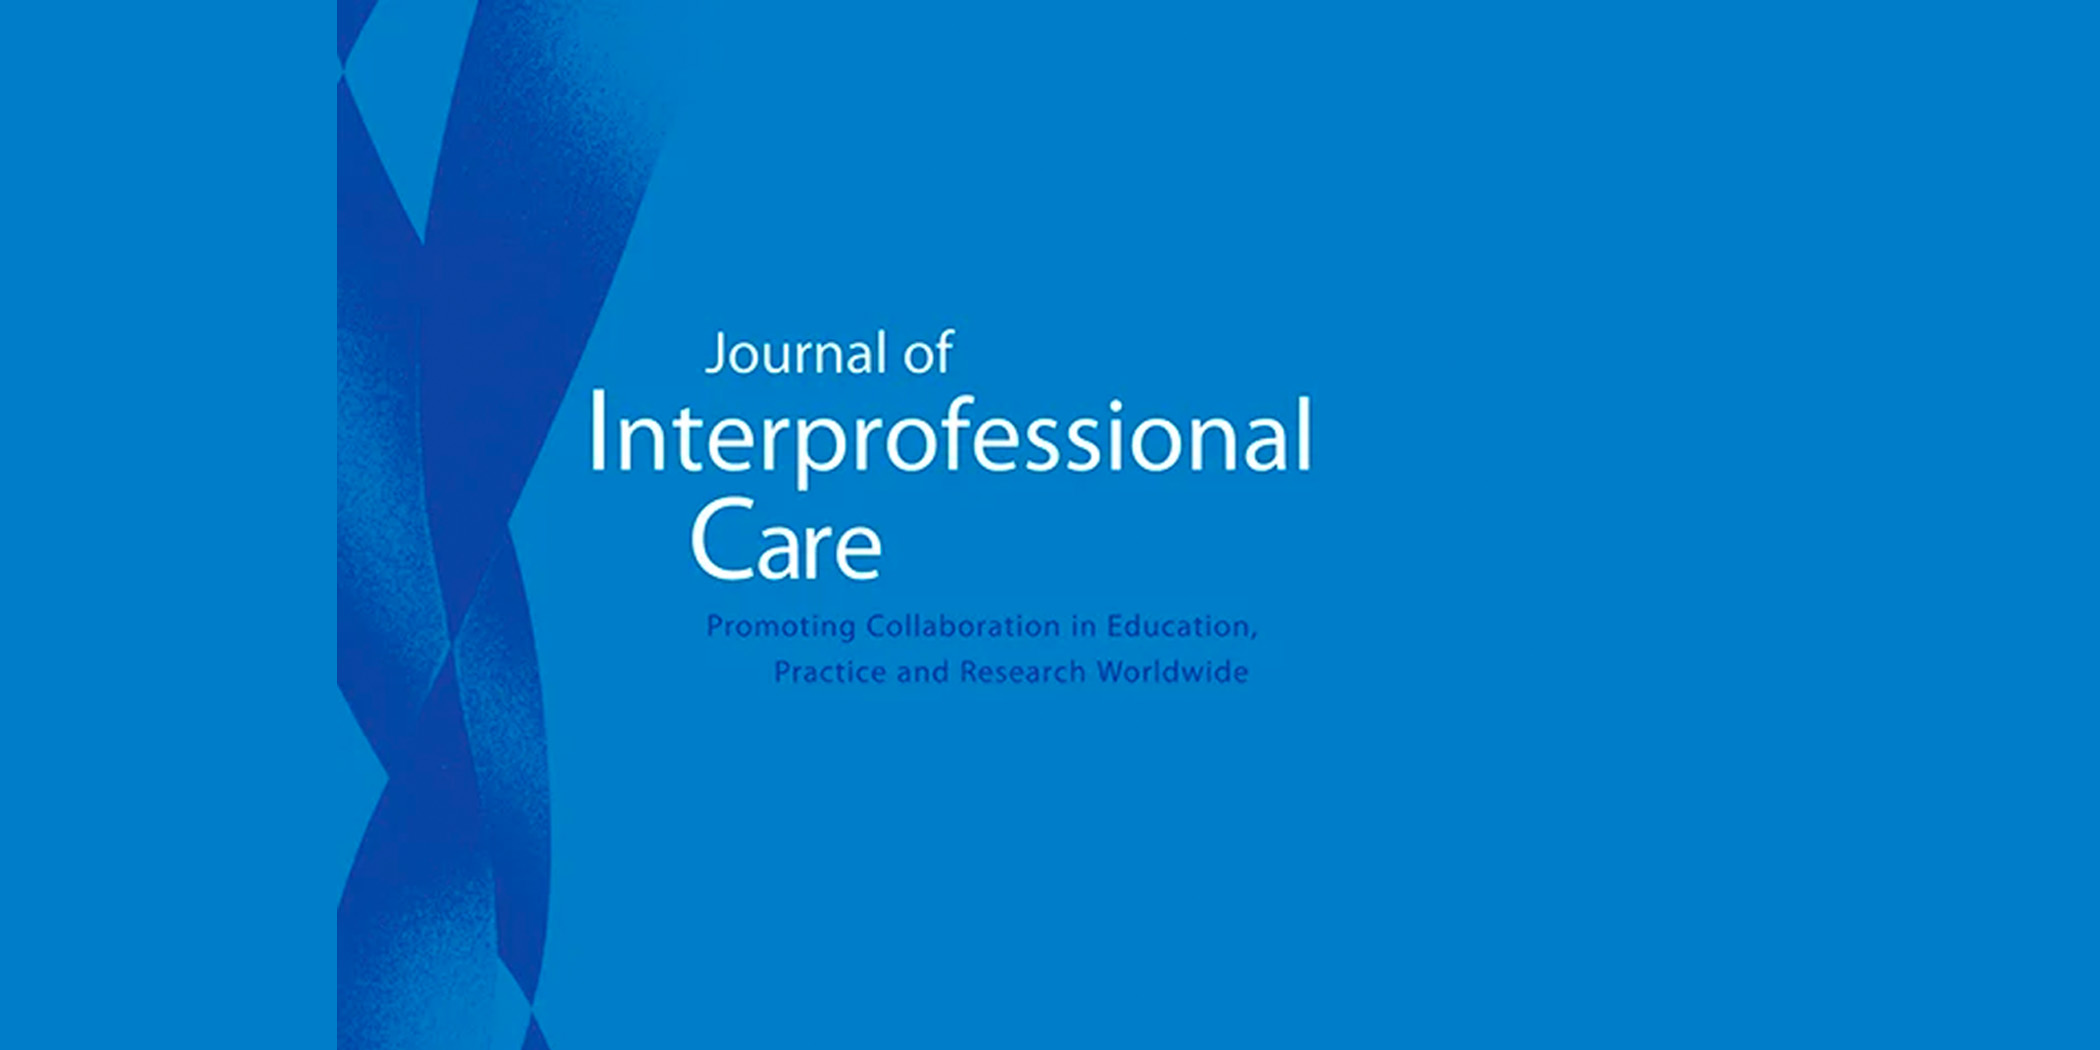 Director Featured in the Journal of Interprofessional Care